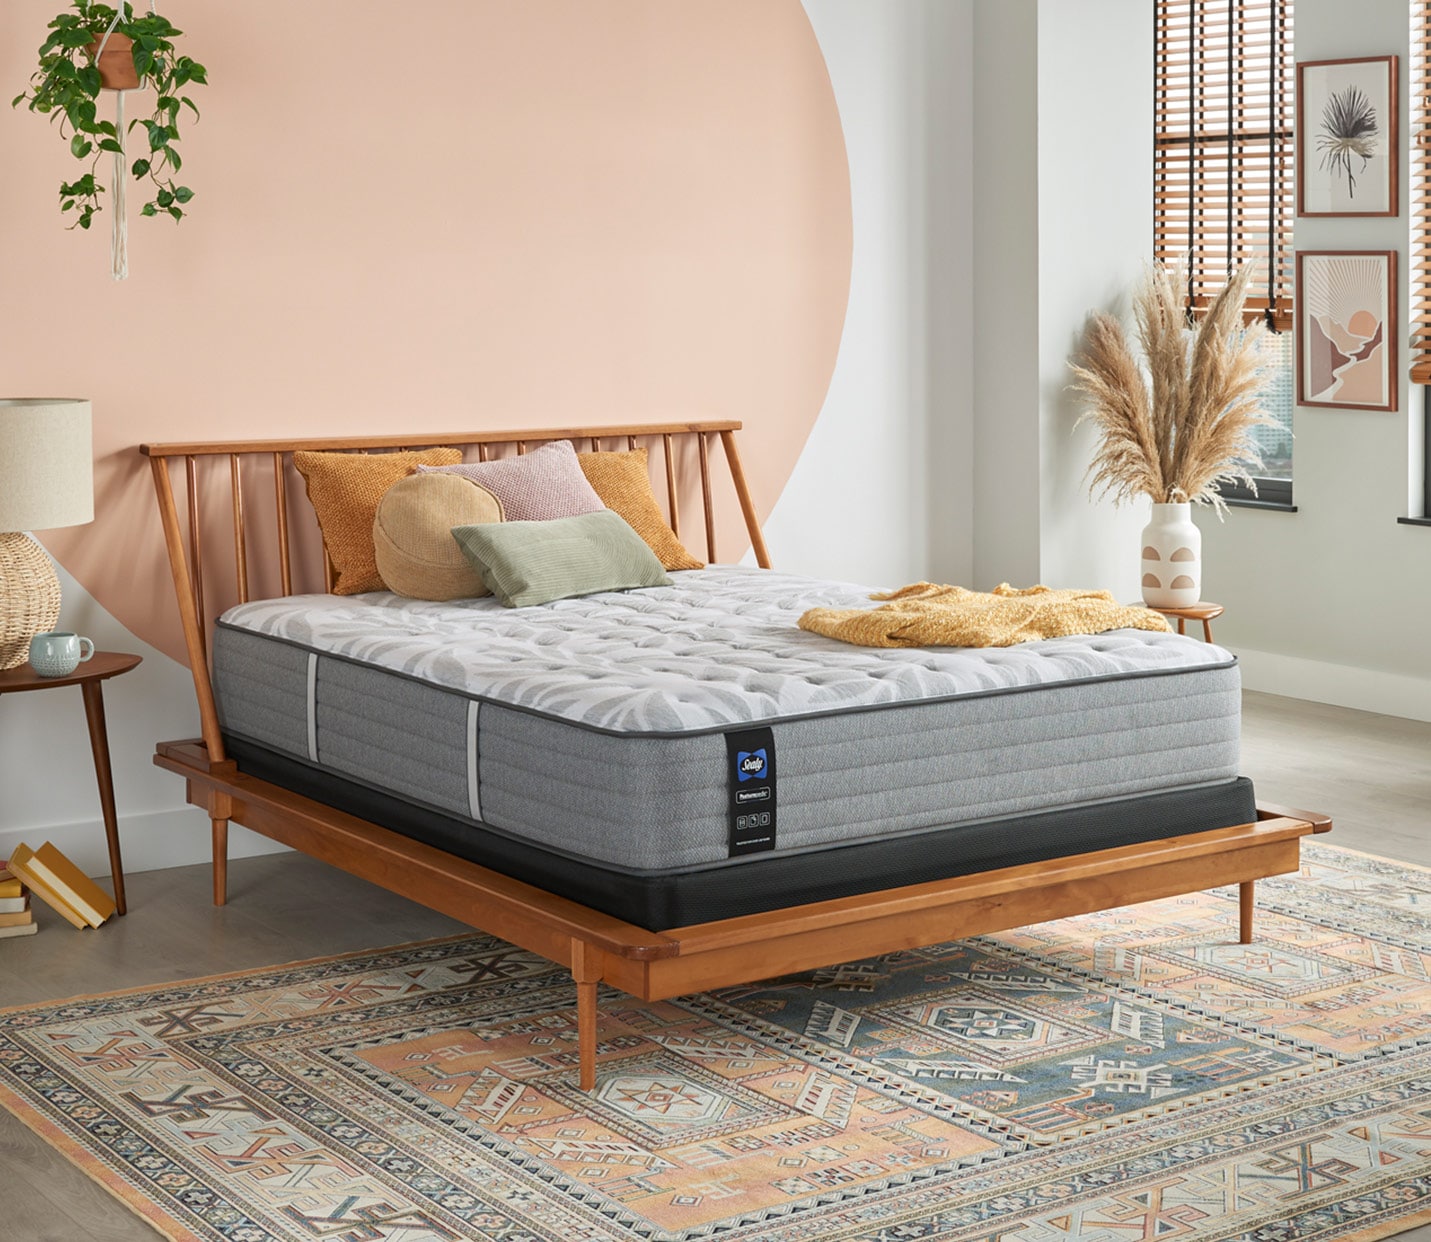 Queen size EPT Sealy Posturepedic<sup>®</sup> mattress in styled bedroom